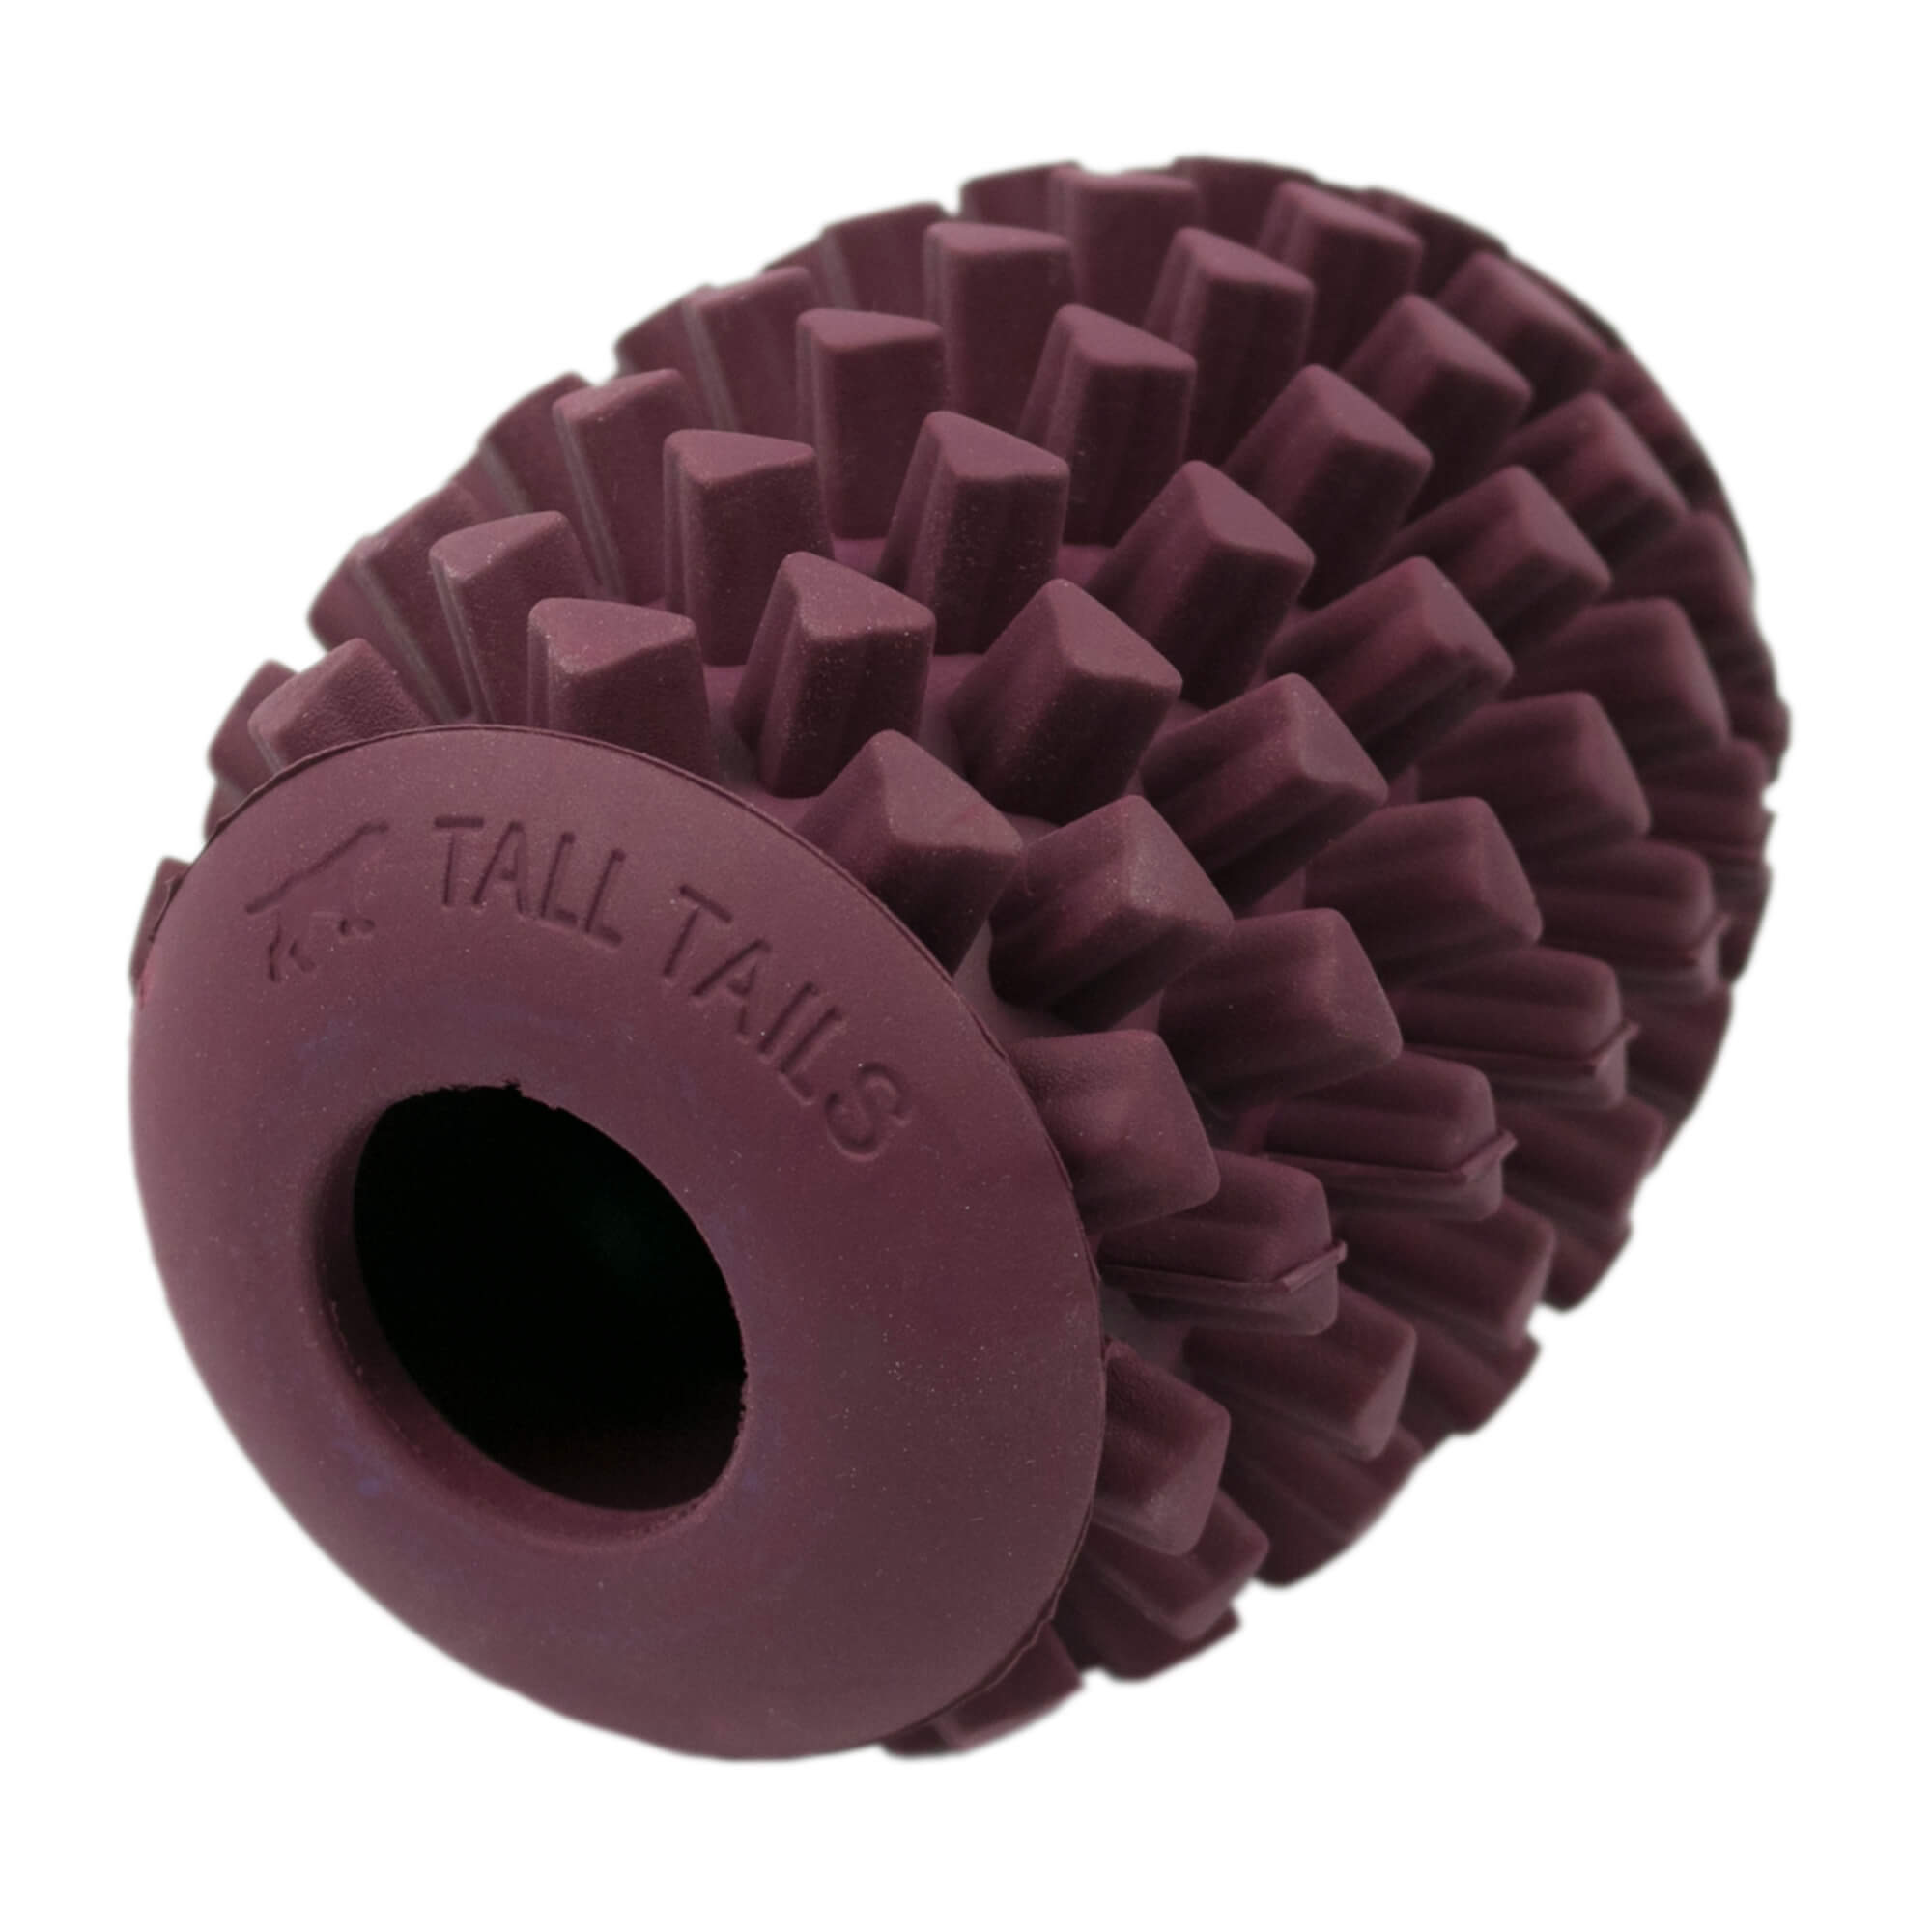 Tall Tails rubber pinecone dog toy purple 